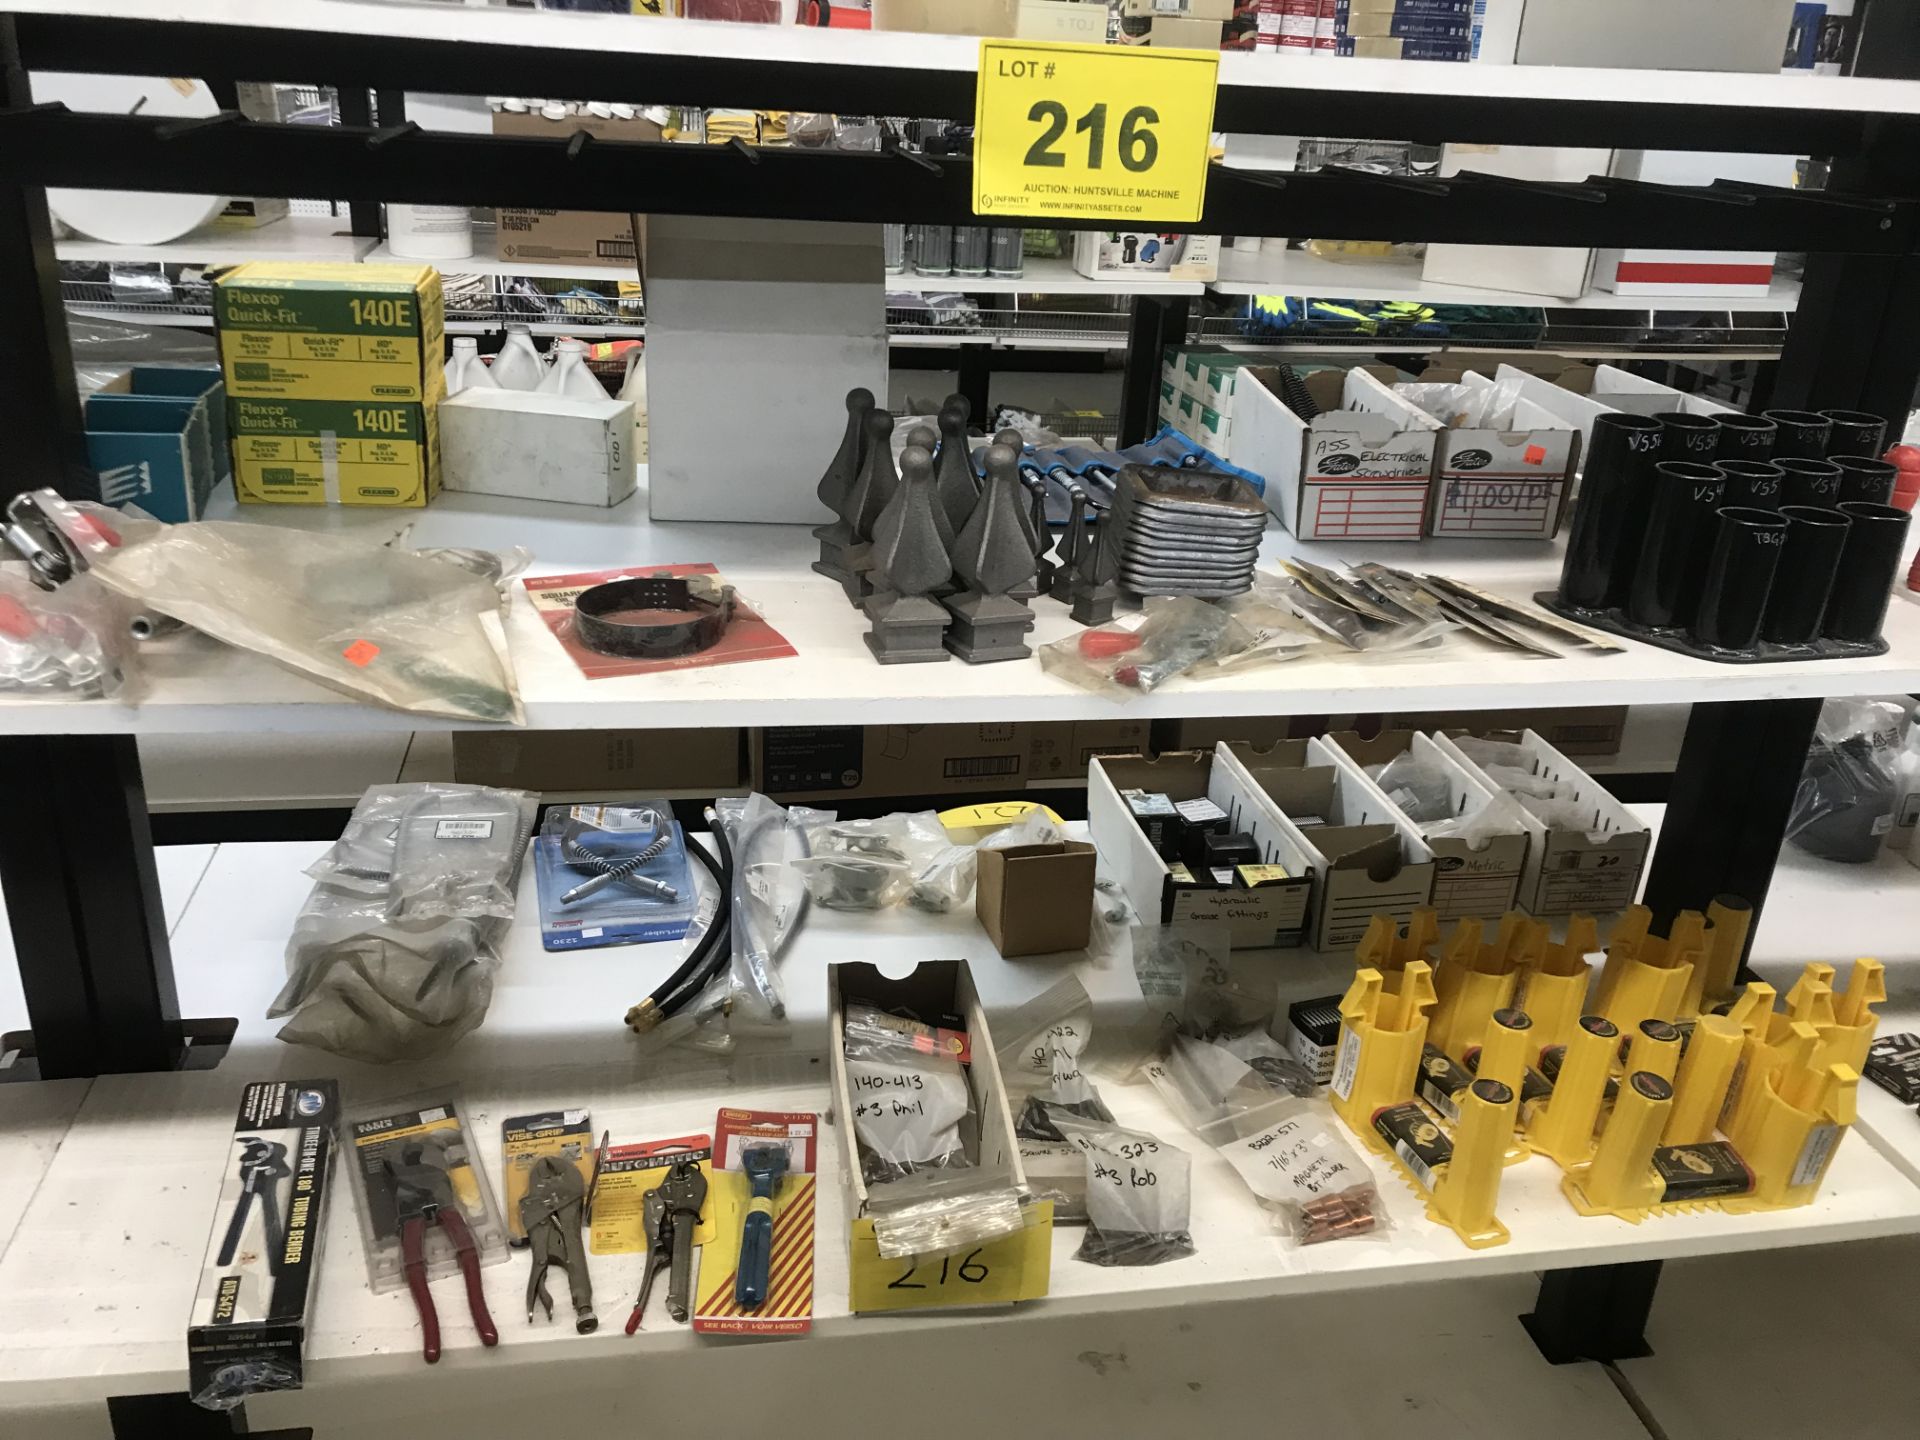 CONTENTS OF (2) SHELVES IN (1) SECTION OF DISPLAY RACK INCLUDING TOOLS, TIPS, CLAMPING FIXTURES,